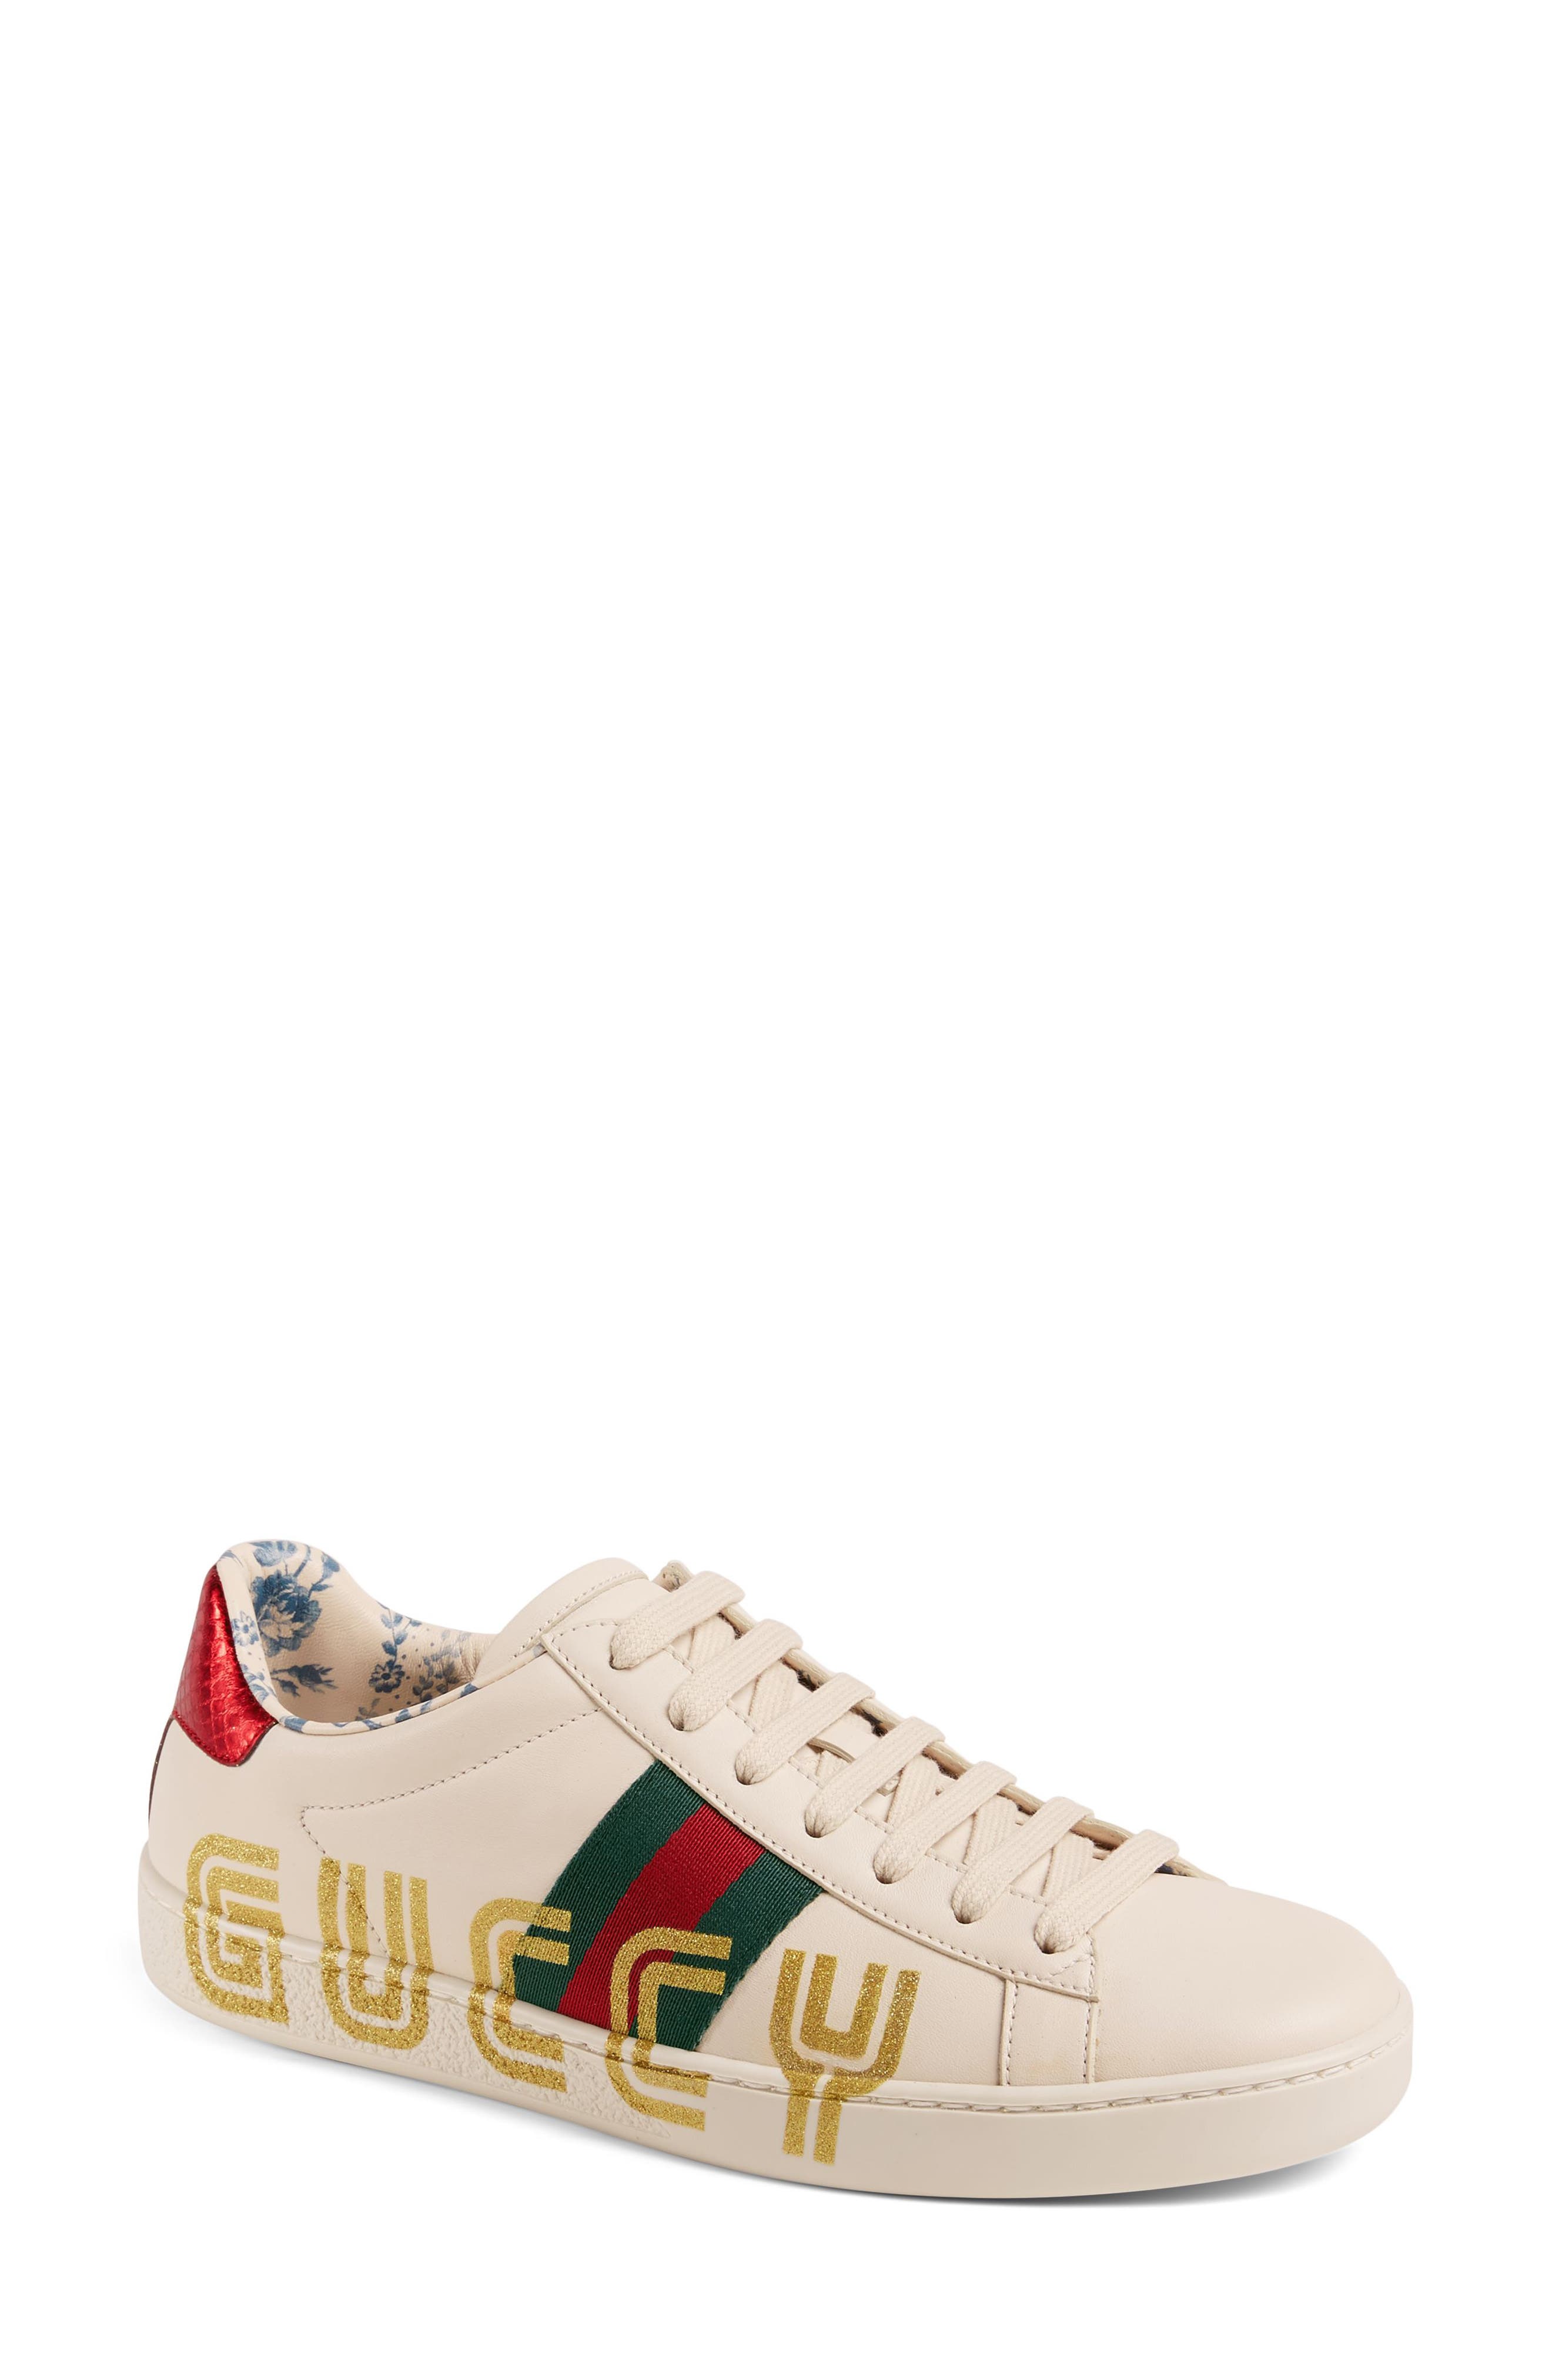 gucci snakeskin shoes